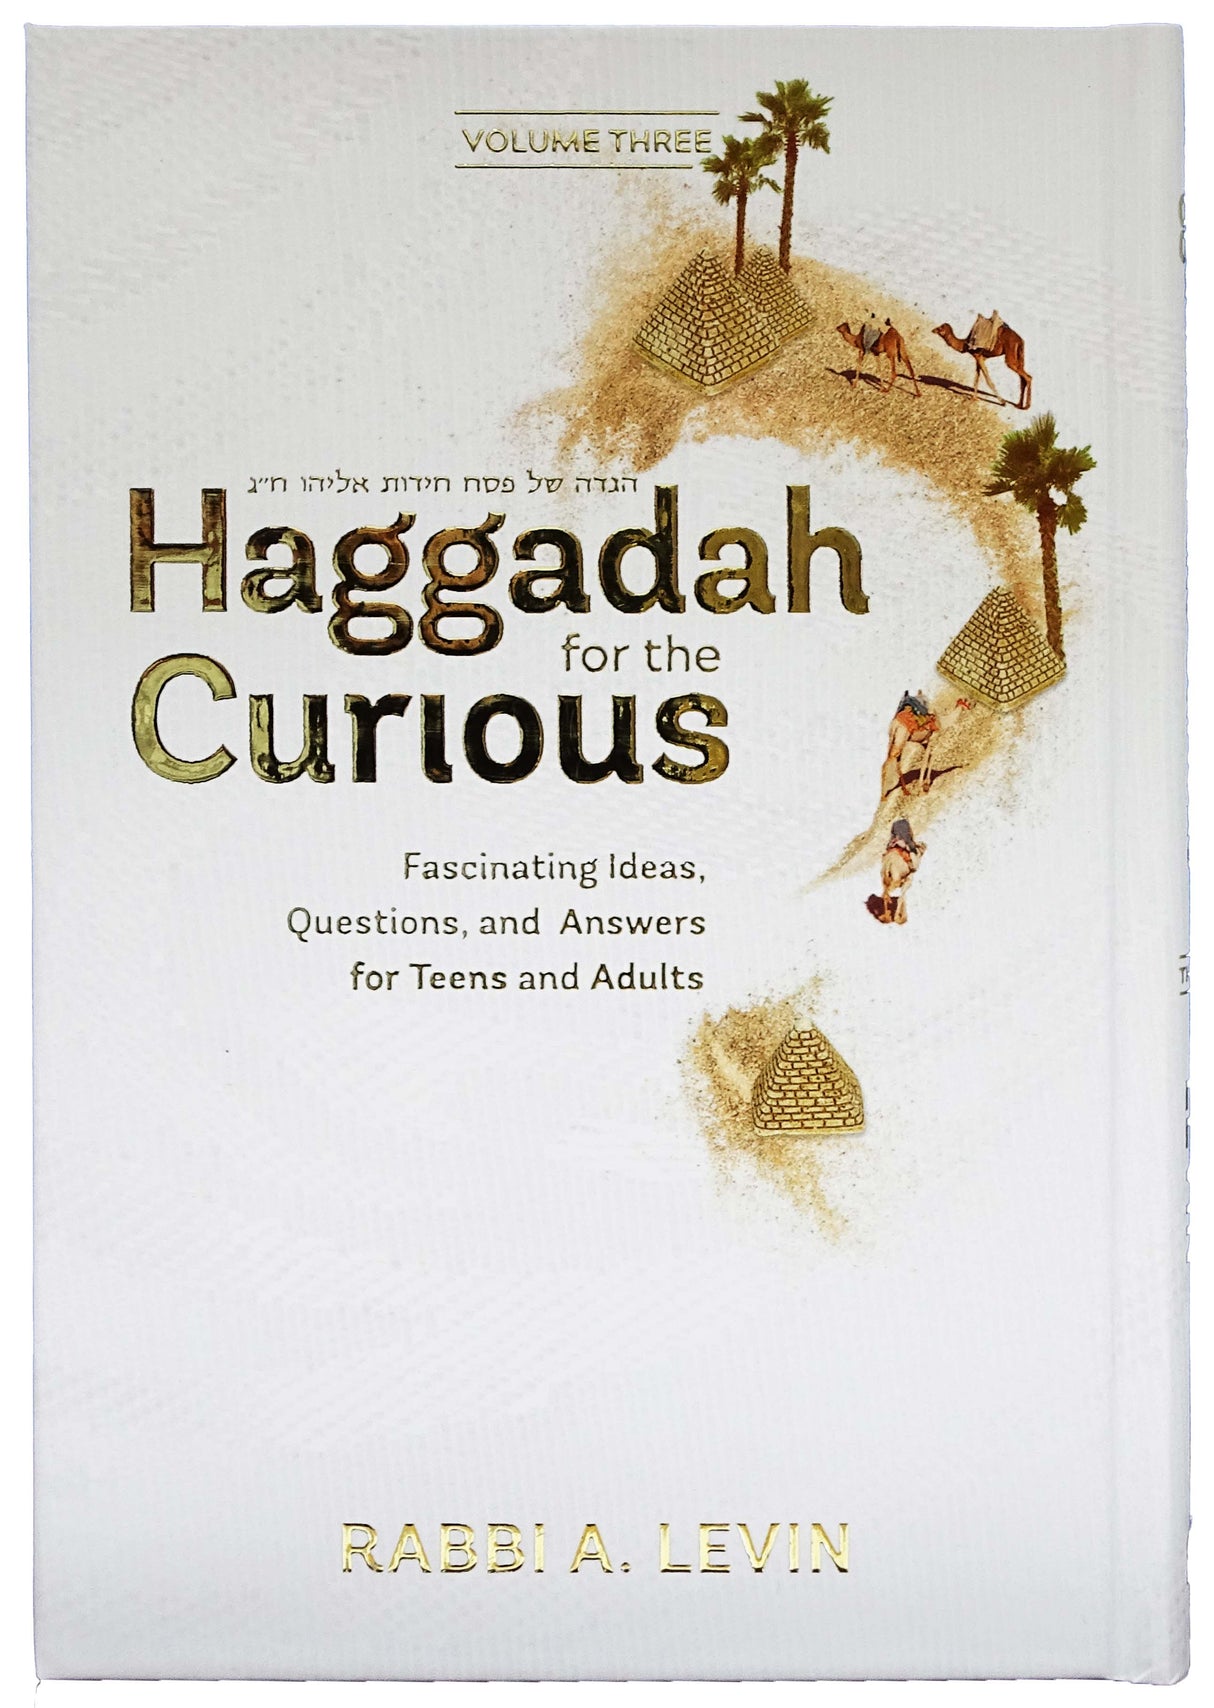 Haggadah for the Curious - Volume 3